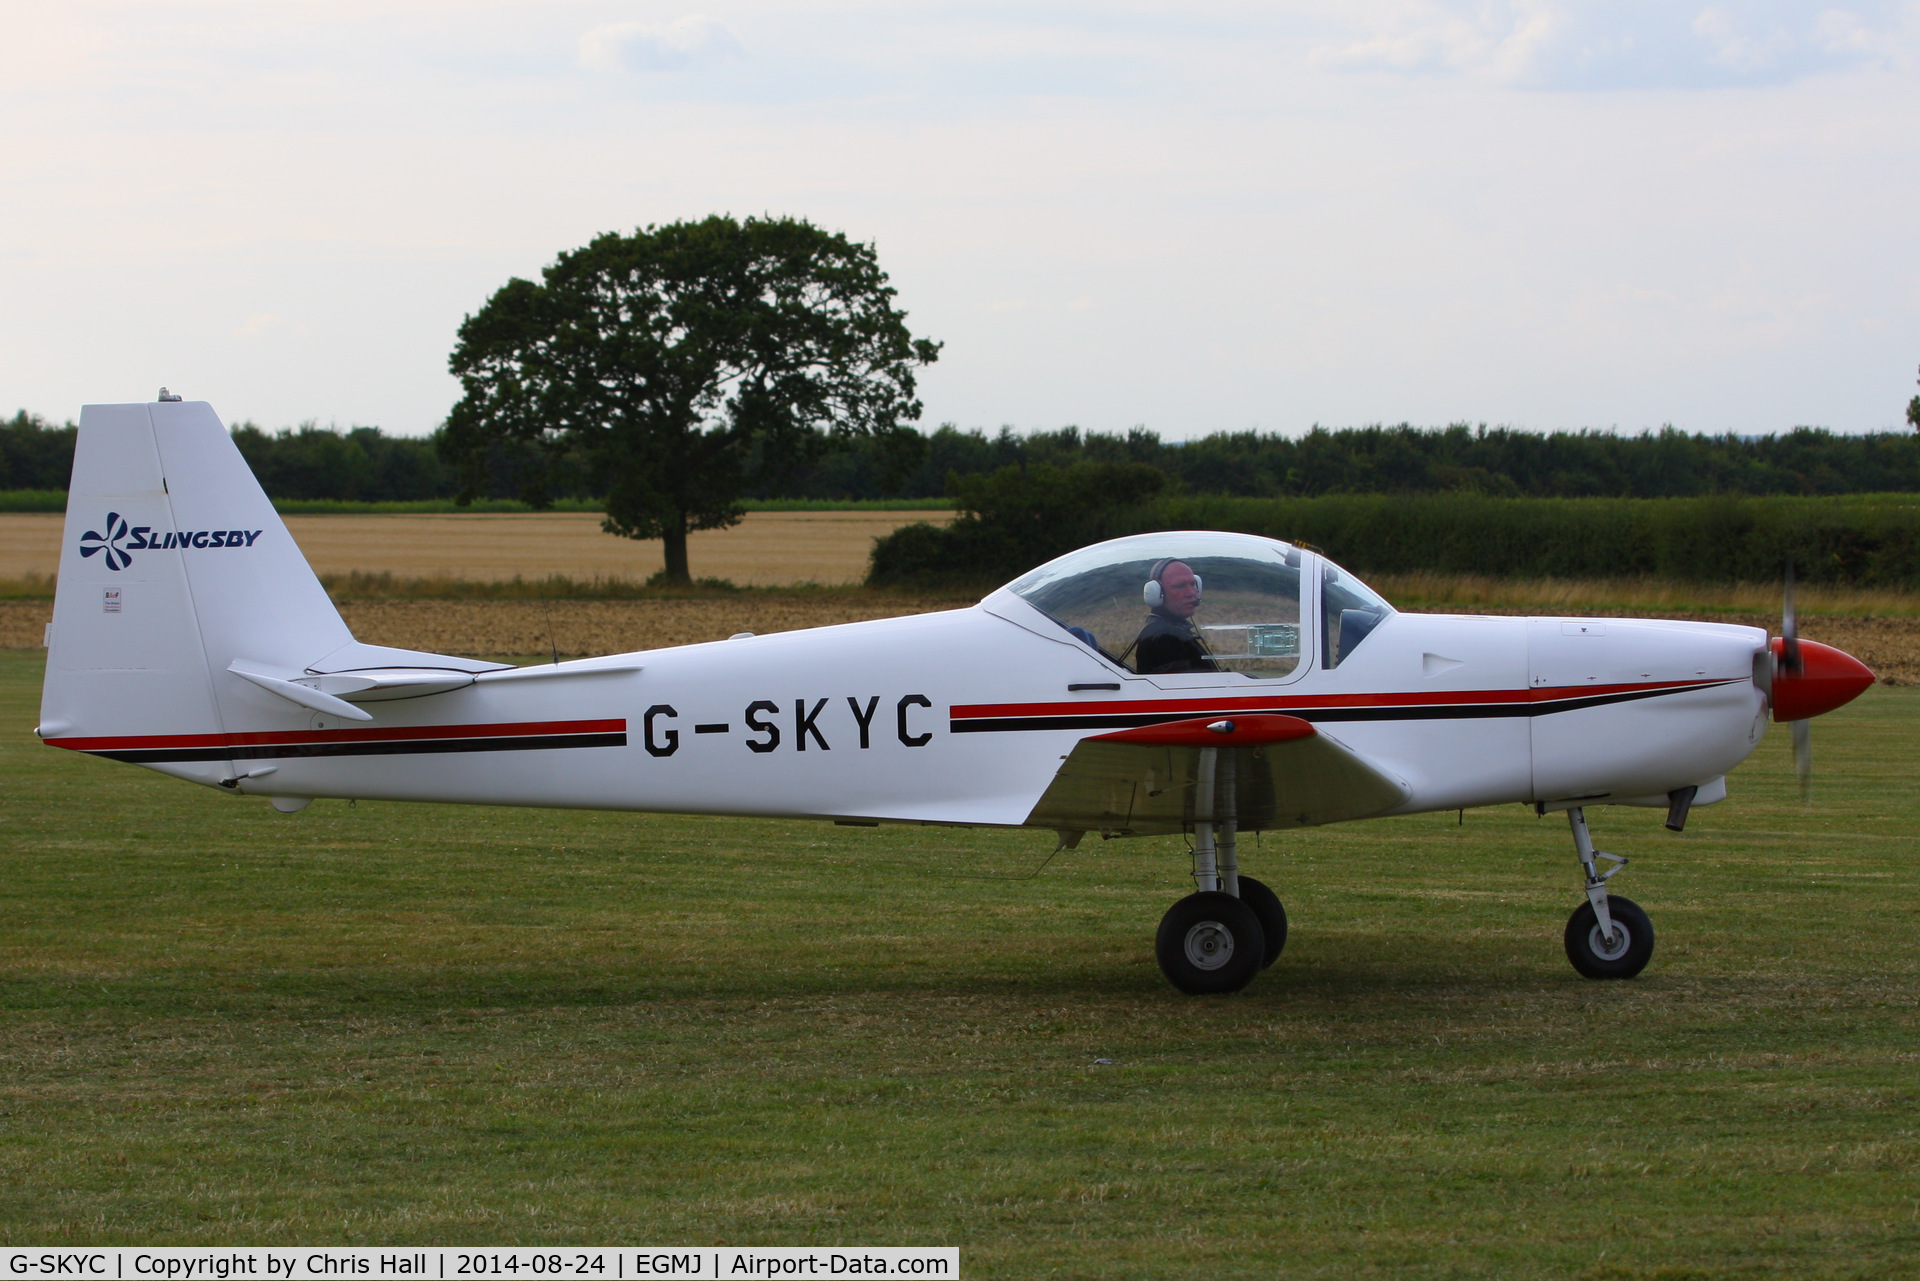 G-SKYC, 1984 Slingsby T-67M Firefly C/N 2009, at the Little Gransden Airshow 2014